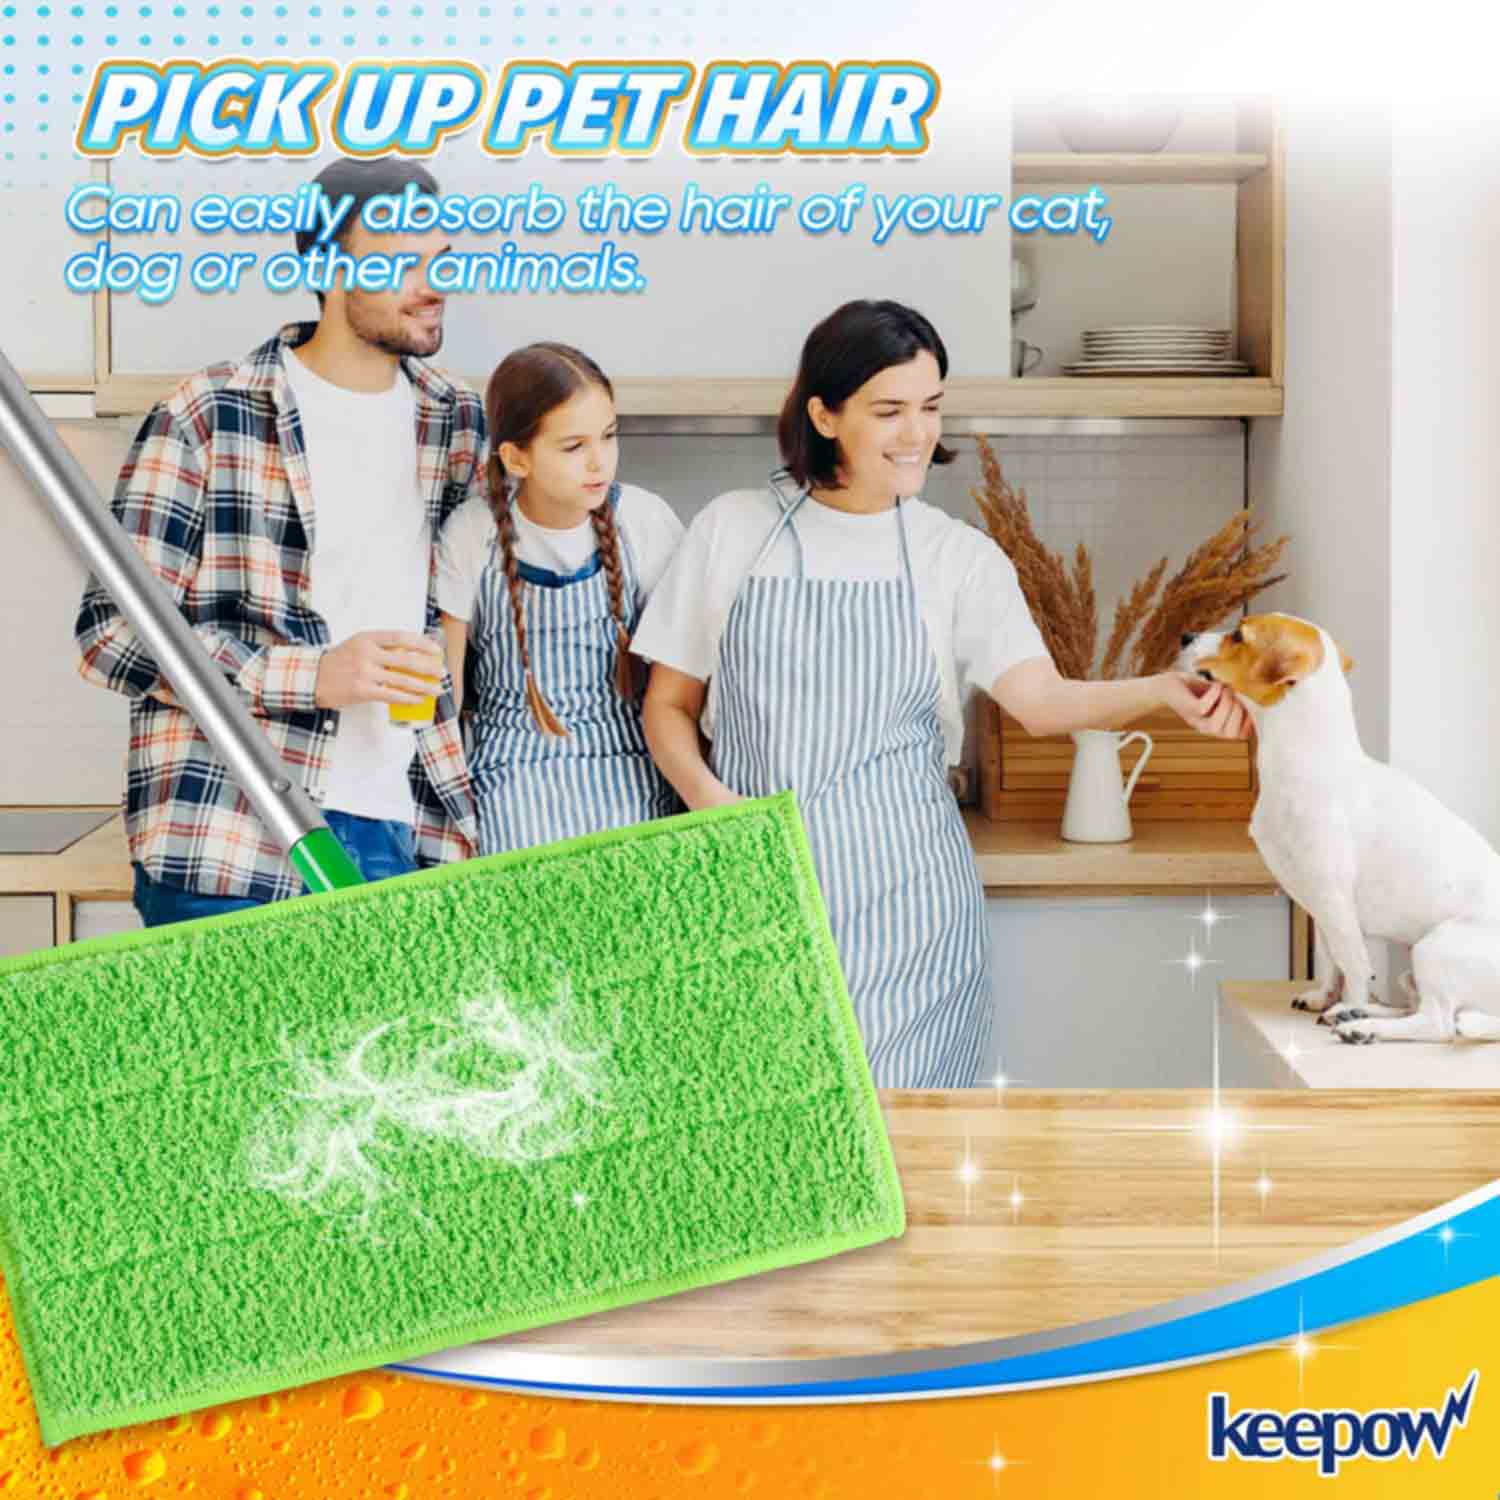 KEEPOW Dry Sweeping Cloths for Swiffer Sweeper, Reusable & Washable Microfiber Mop Pads Refills, Wet Mopping Cloths for Hard-Surface/Hardwood Floor Cleaning, 4-Pack (Mop is Not Included)